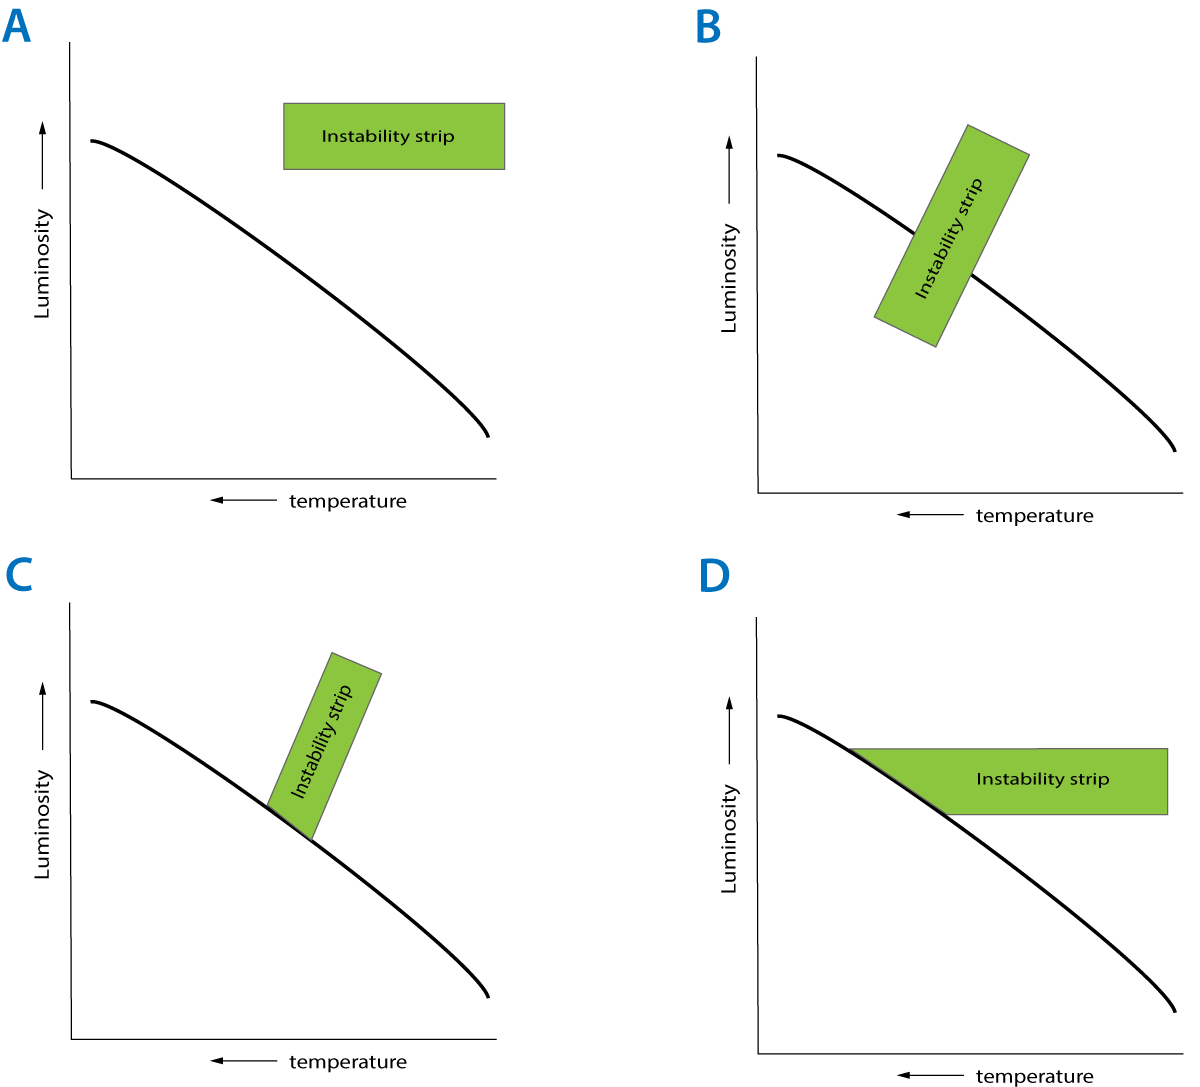 HR diagram instabilty strip with 4 options